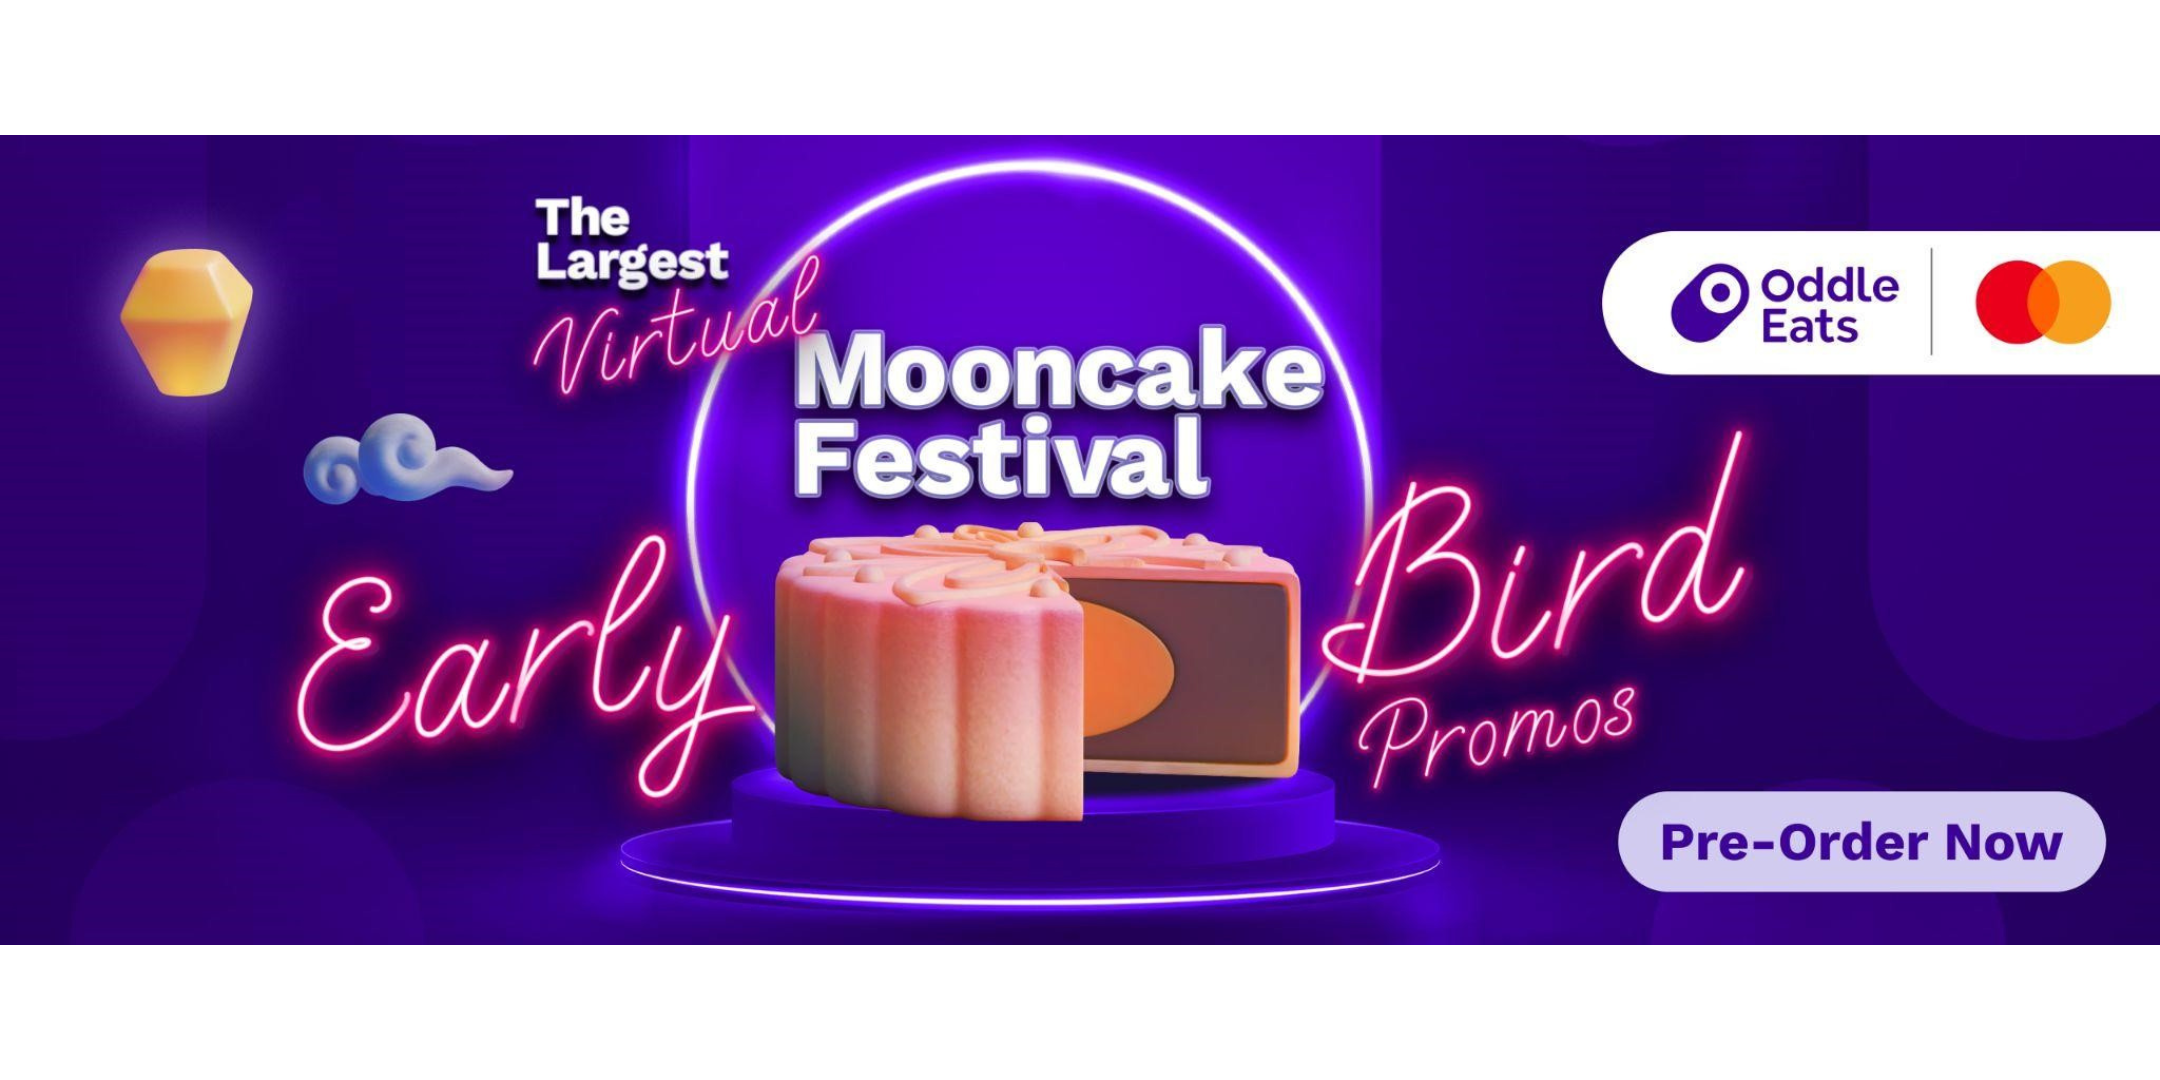 Exclusive Early Bird Mooncake Promo of Up to 35% OFF on Oddle Eats, for Limited Period Only!